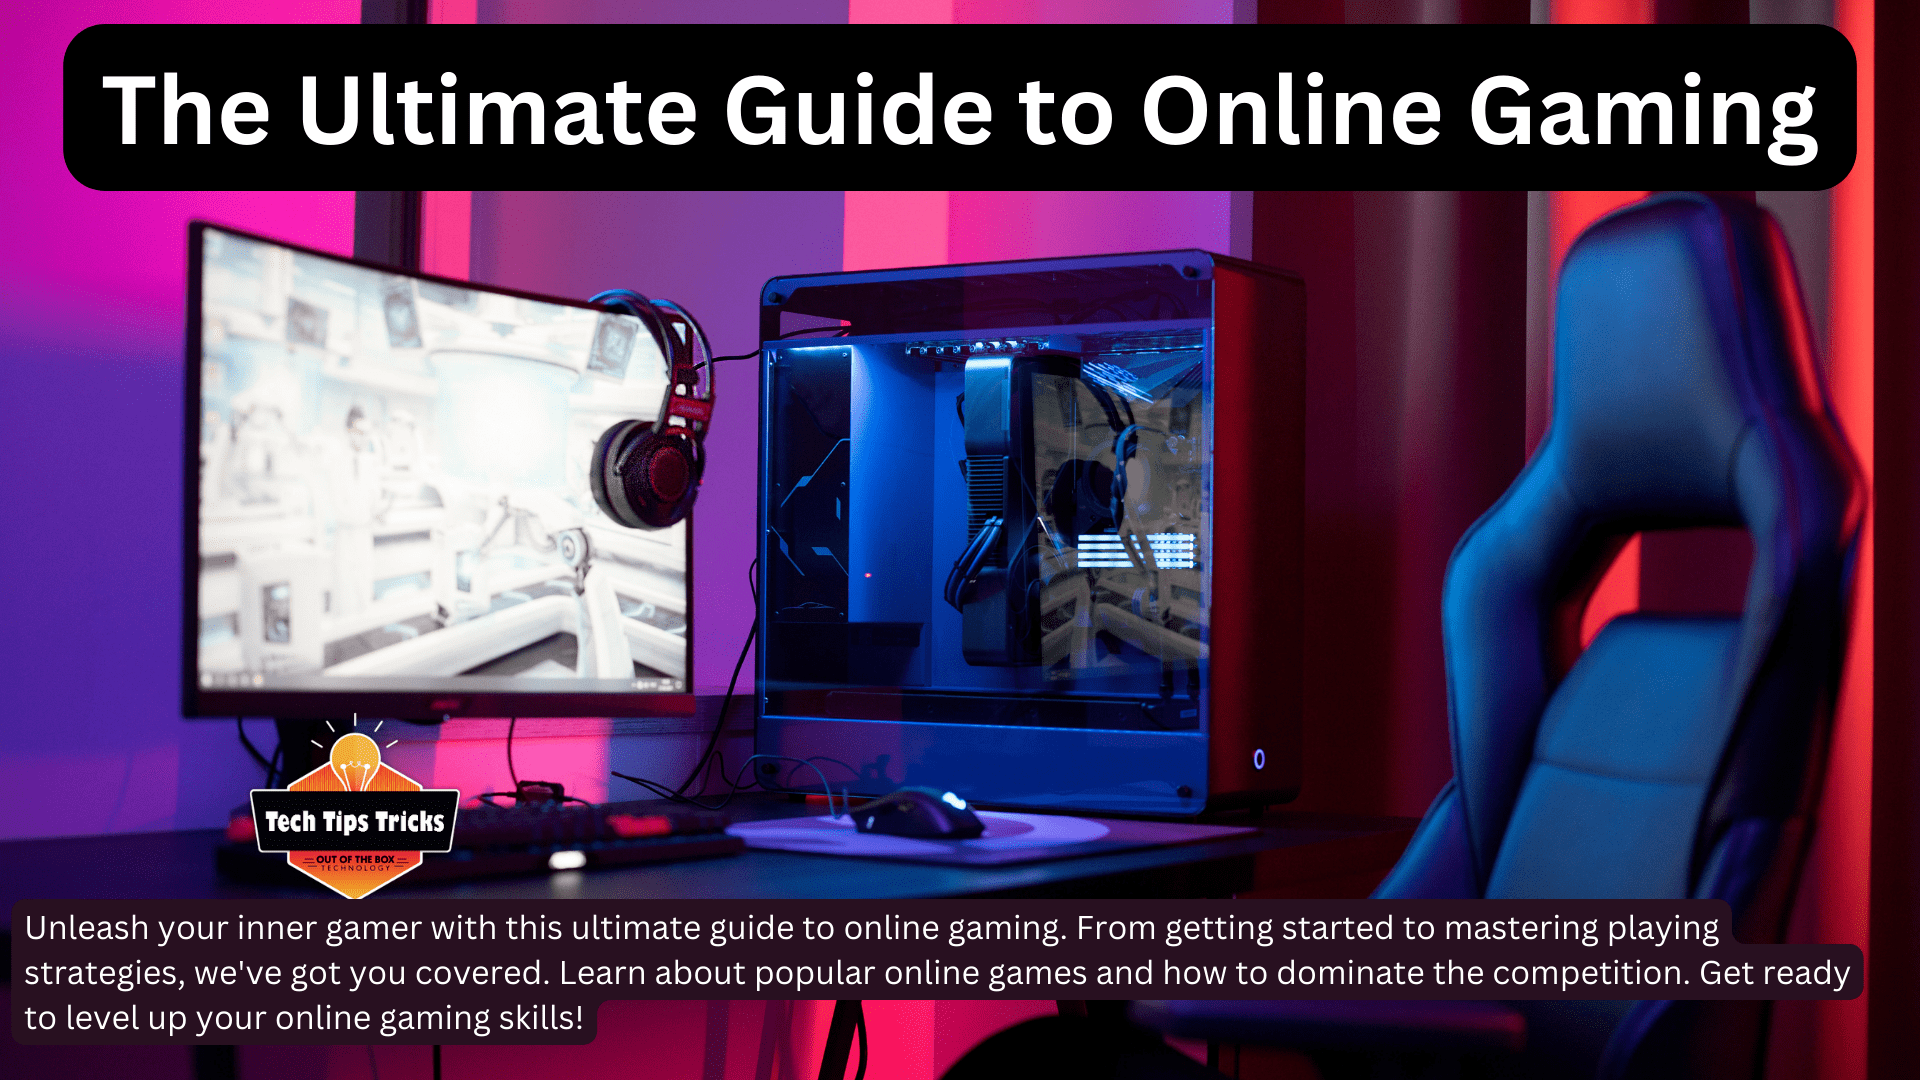 Unleash Your Inner Gamer The Ultimate Guide to Online Gaming